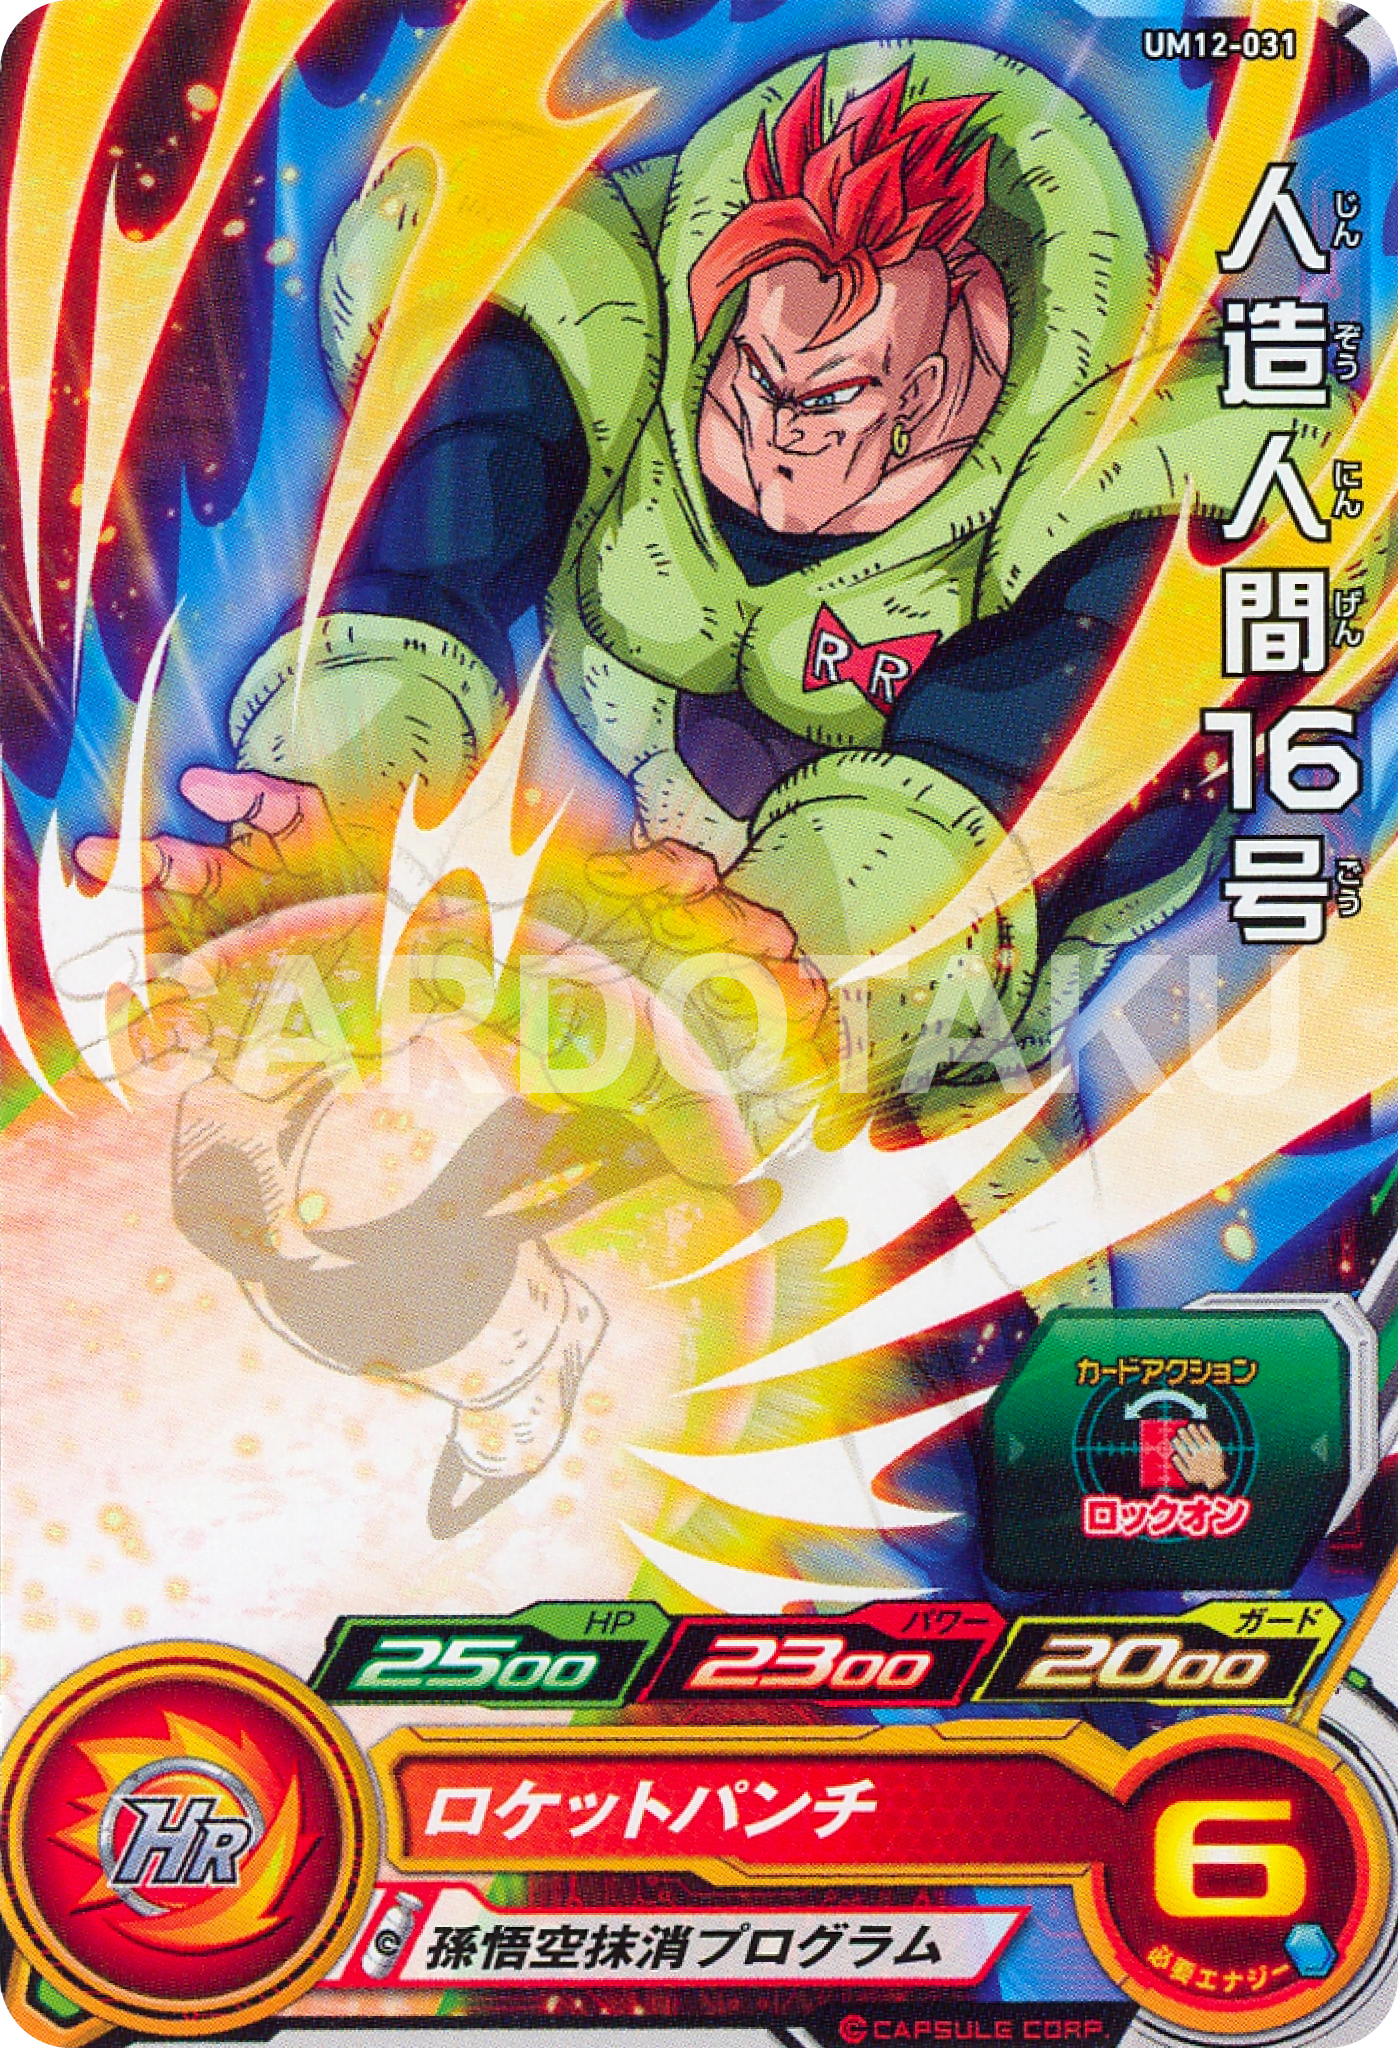 SUPER DRAGON BALL HEROES UM12-031 Common card Android 16, C16